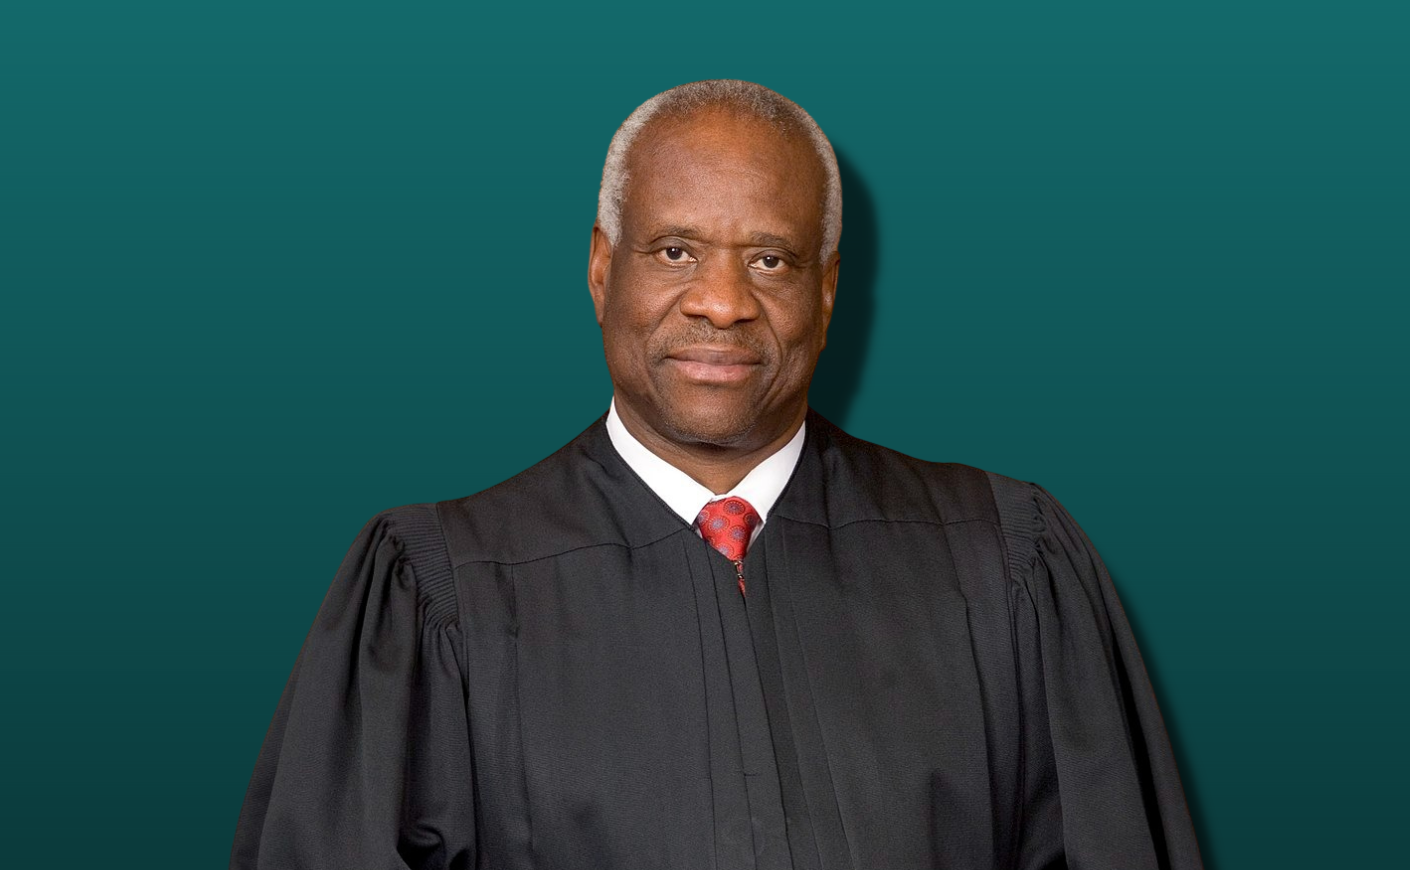 Justice Clarence Thomas on a green background